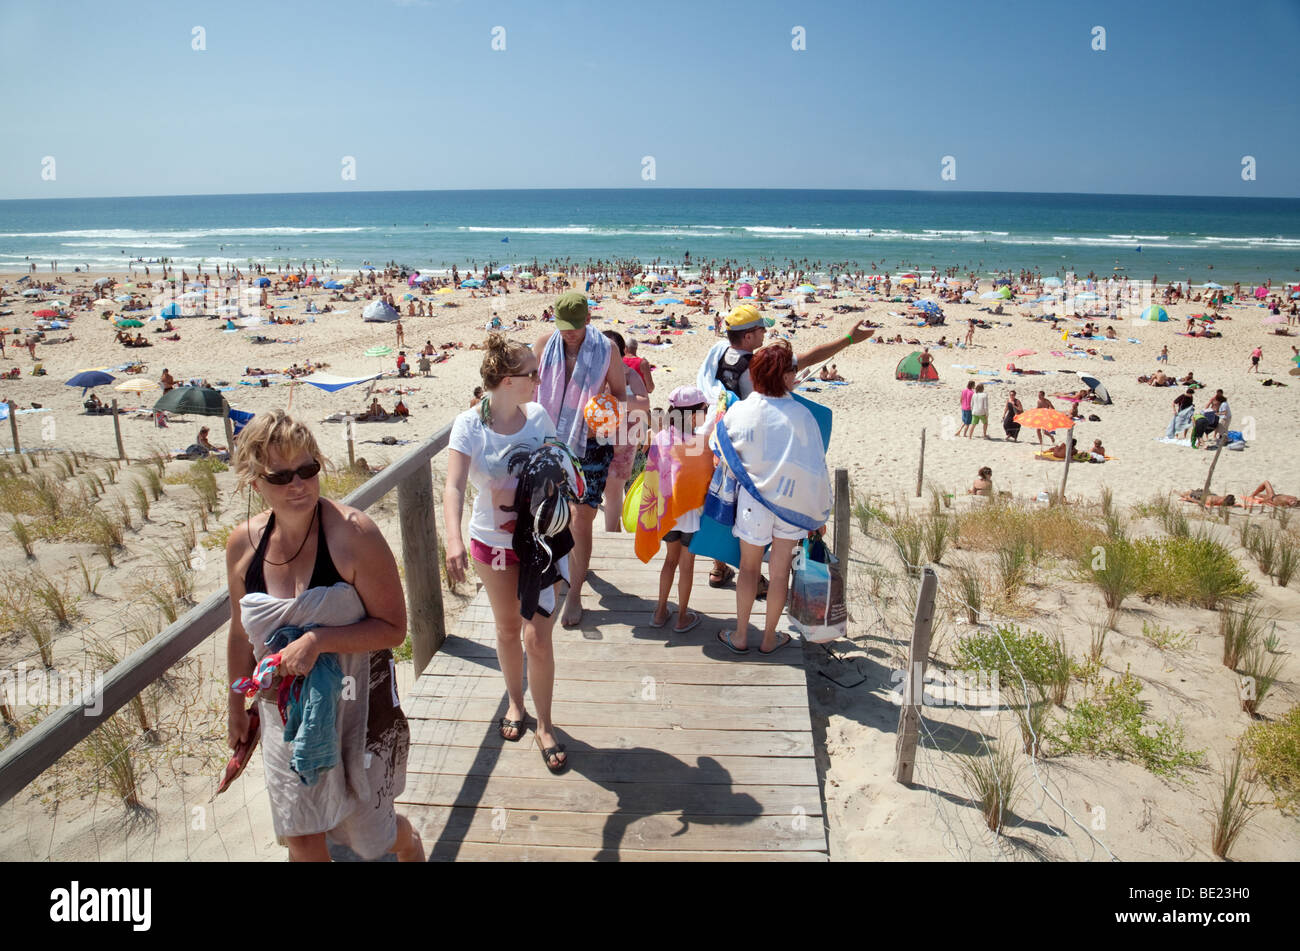 Crowds on the beach at Biscarrosse, Aquitaine, France Stock Photo